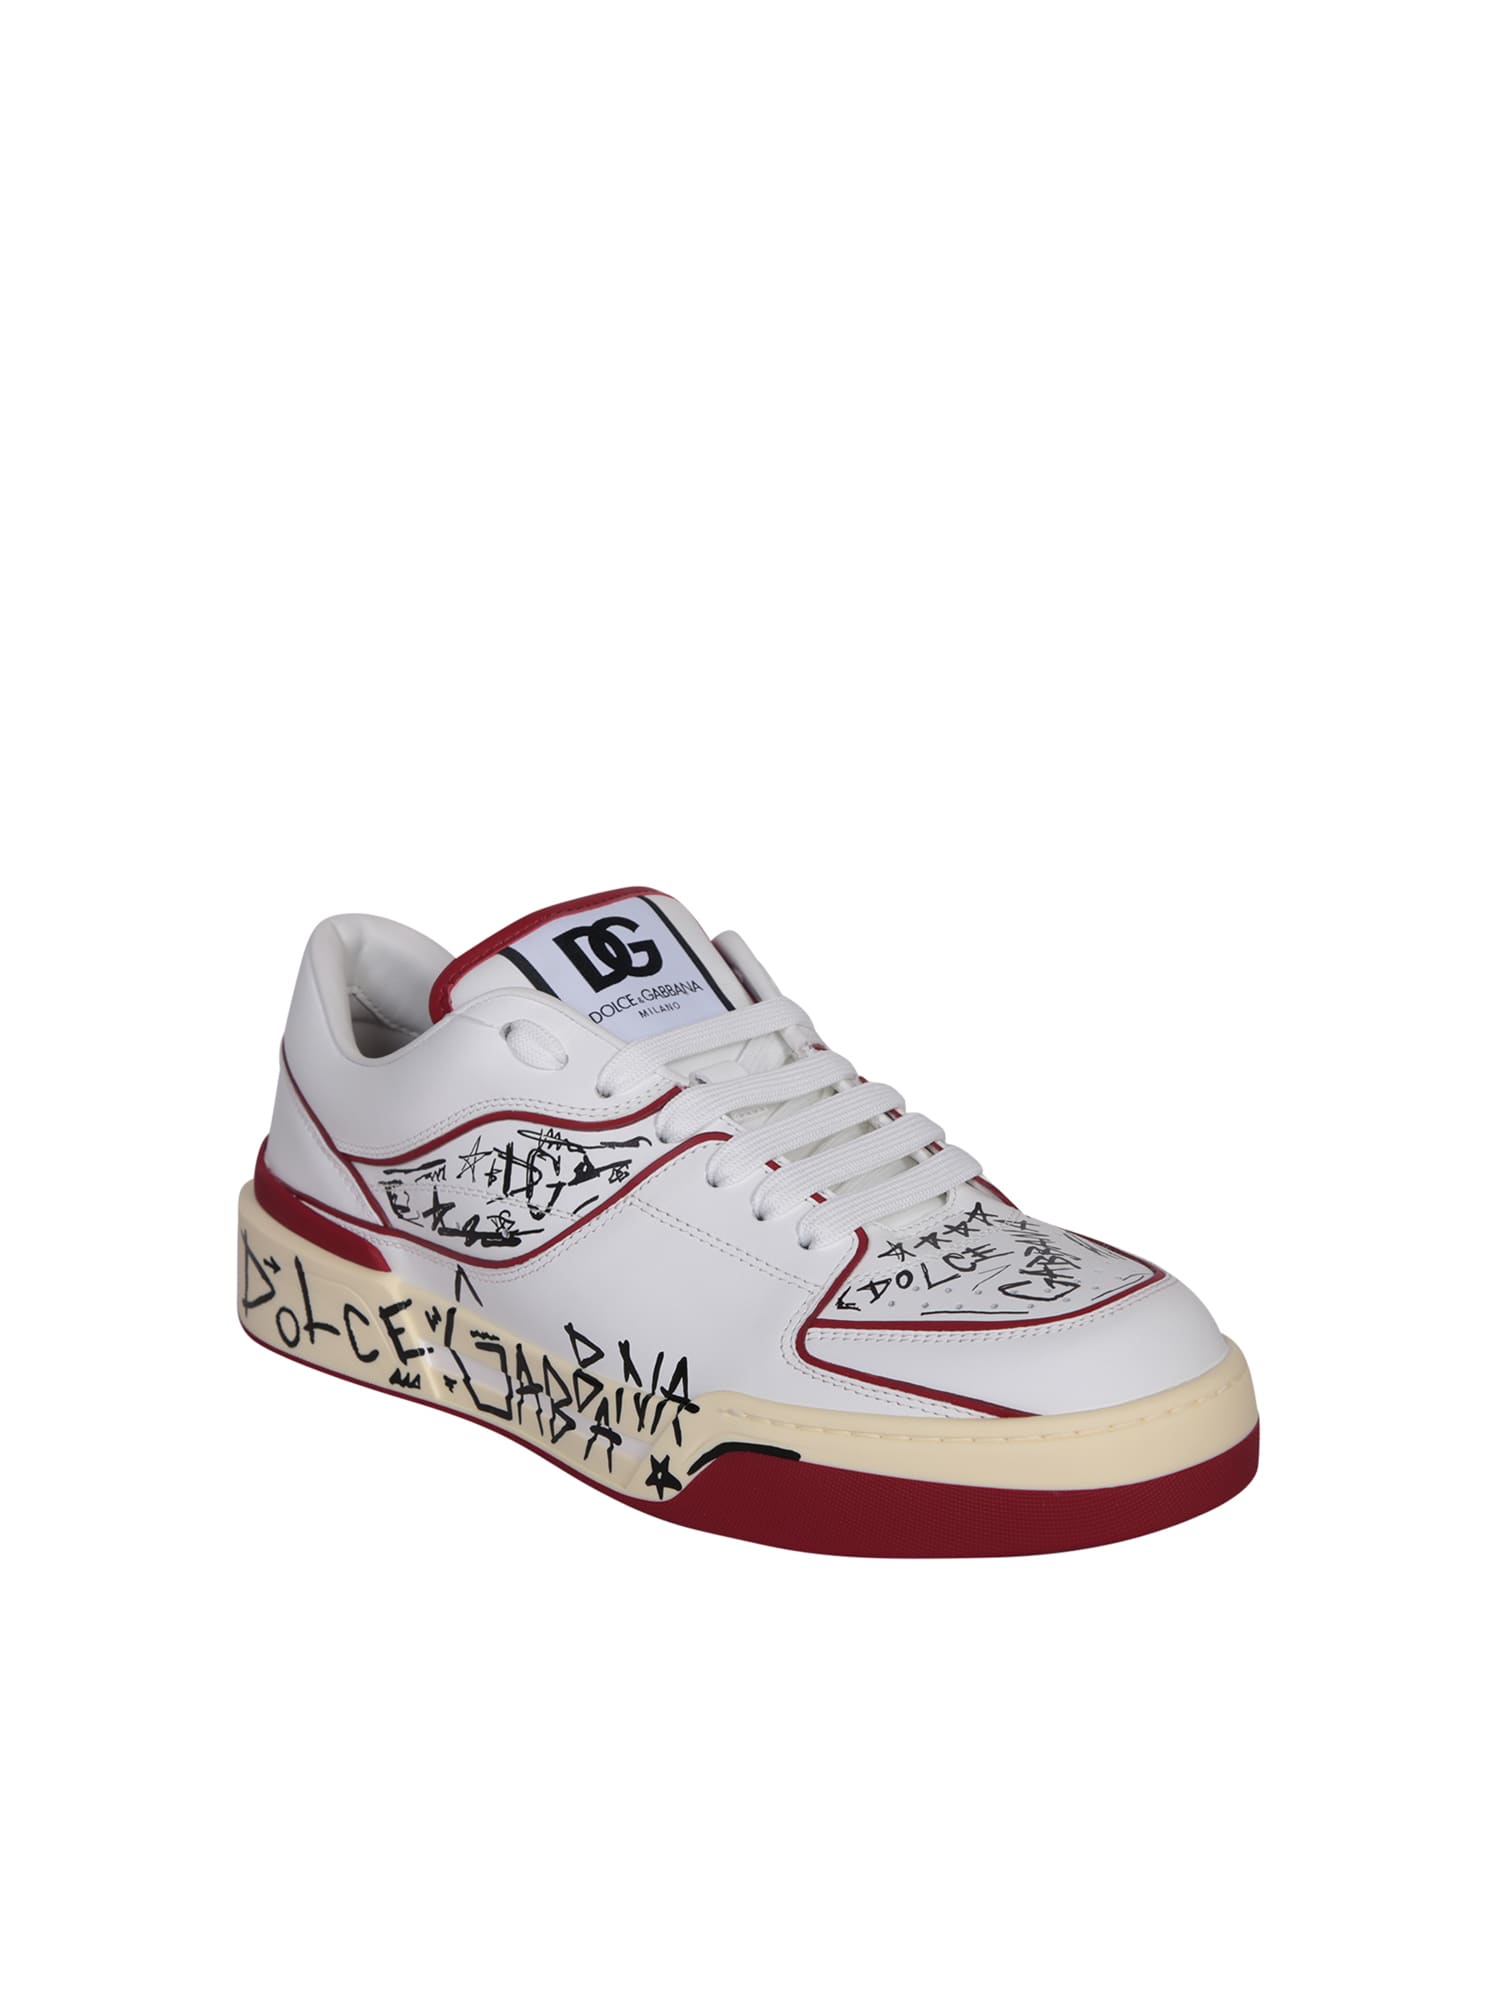 Shop Dolce & Gabbana New Roma Allover Graffiti Sneakers In White With Red Accents